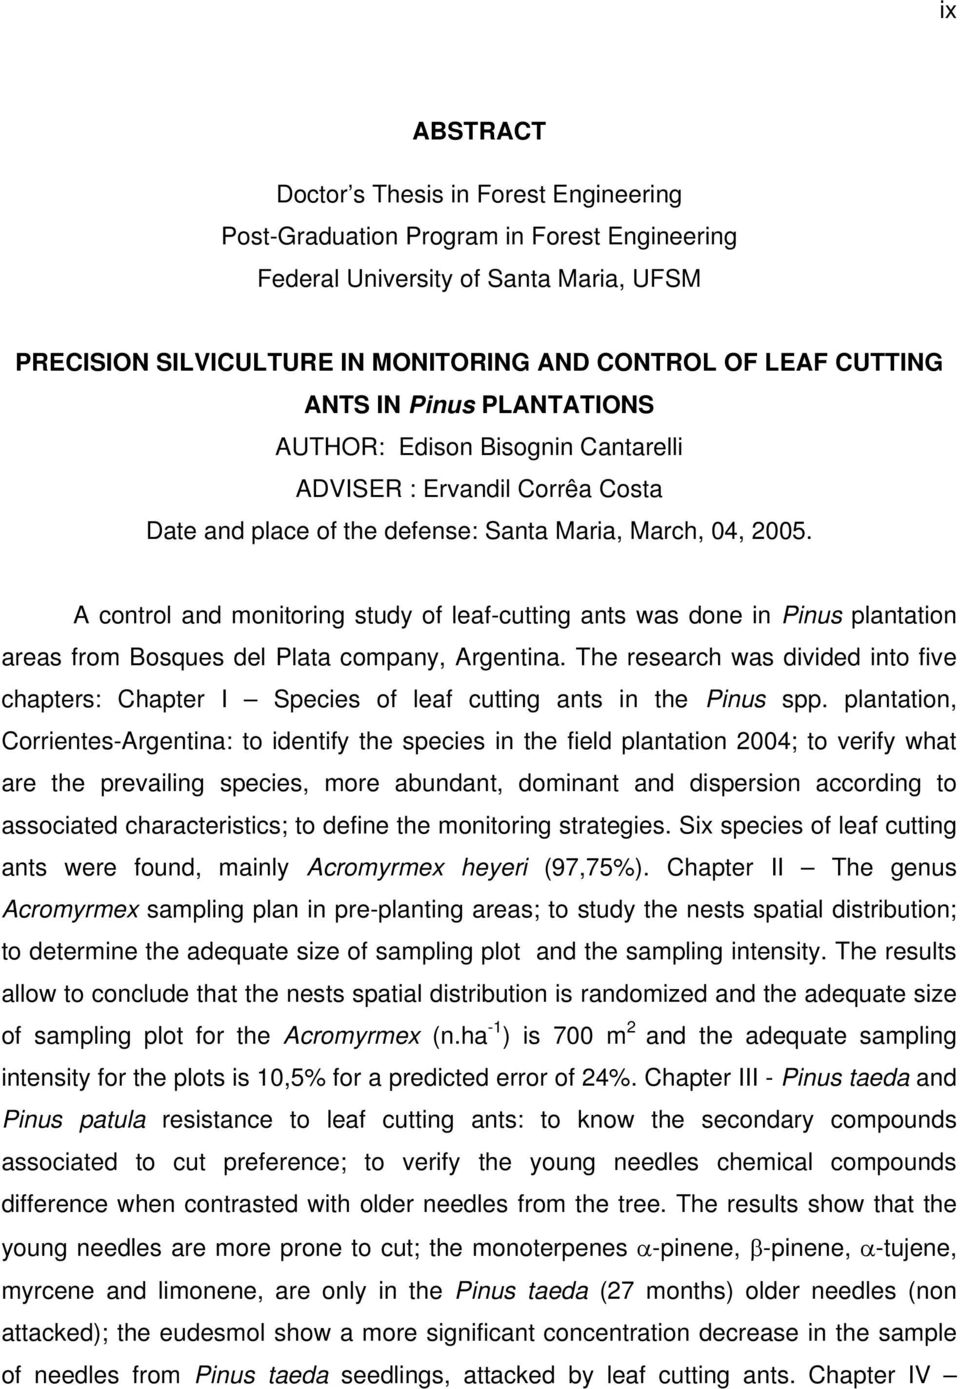 A control and monitoring study of leaf-cutting ants was done in Pinus plantation areas from Bosques del Plata company, Argentina.